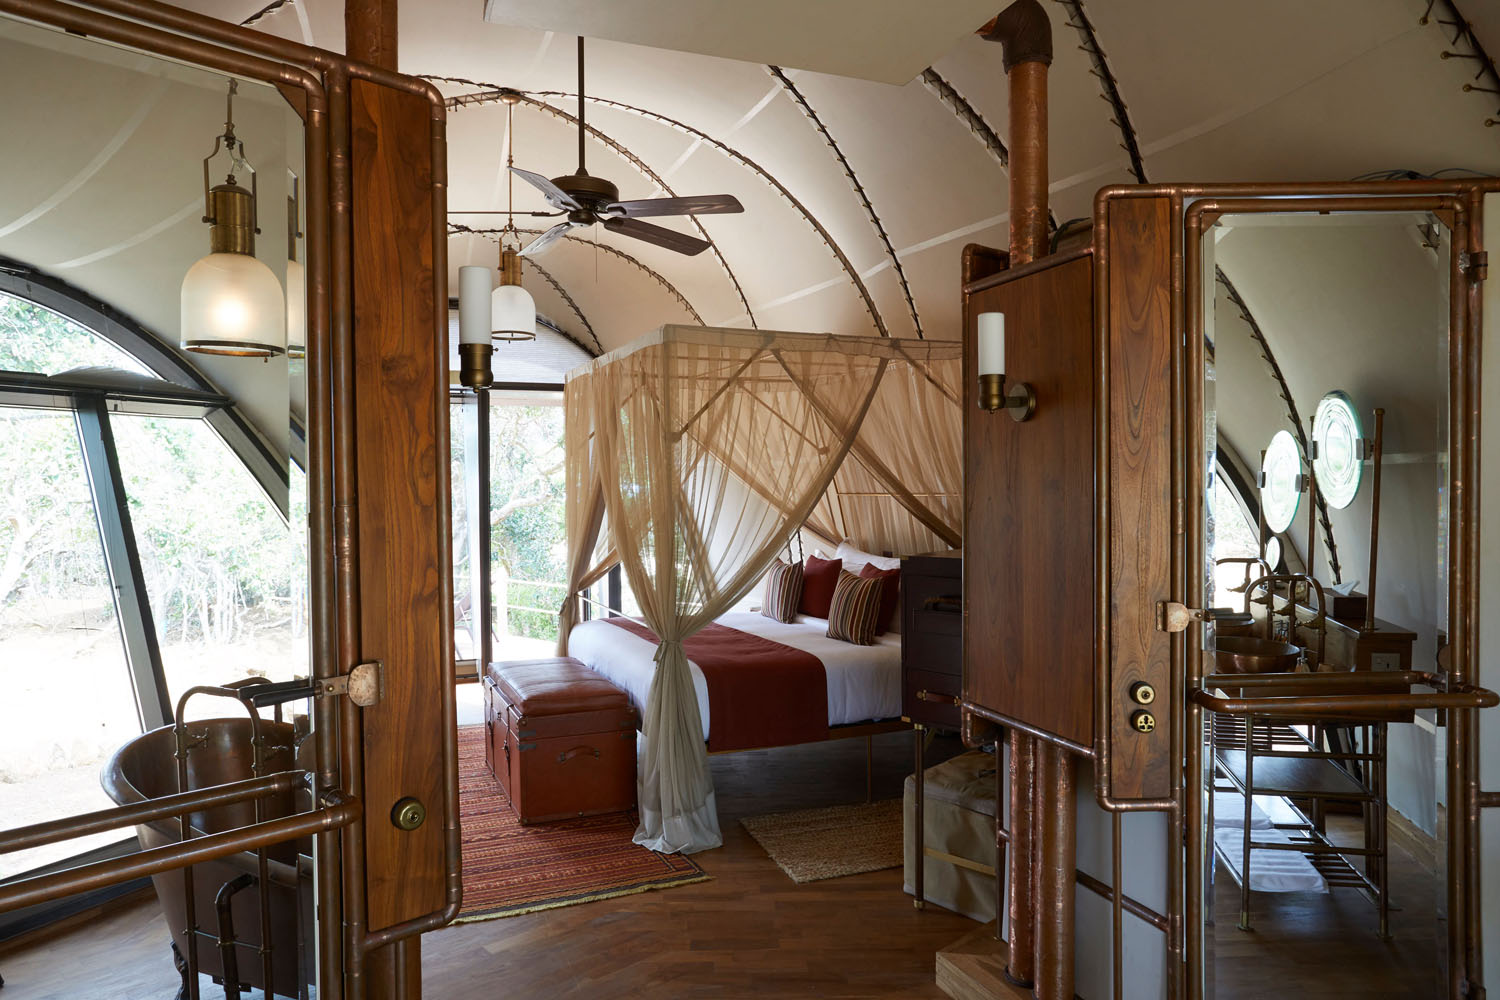 Interior of the tented Cocoon suite in Yala National Park